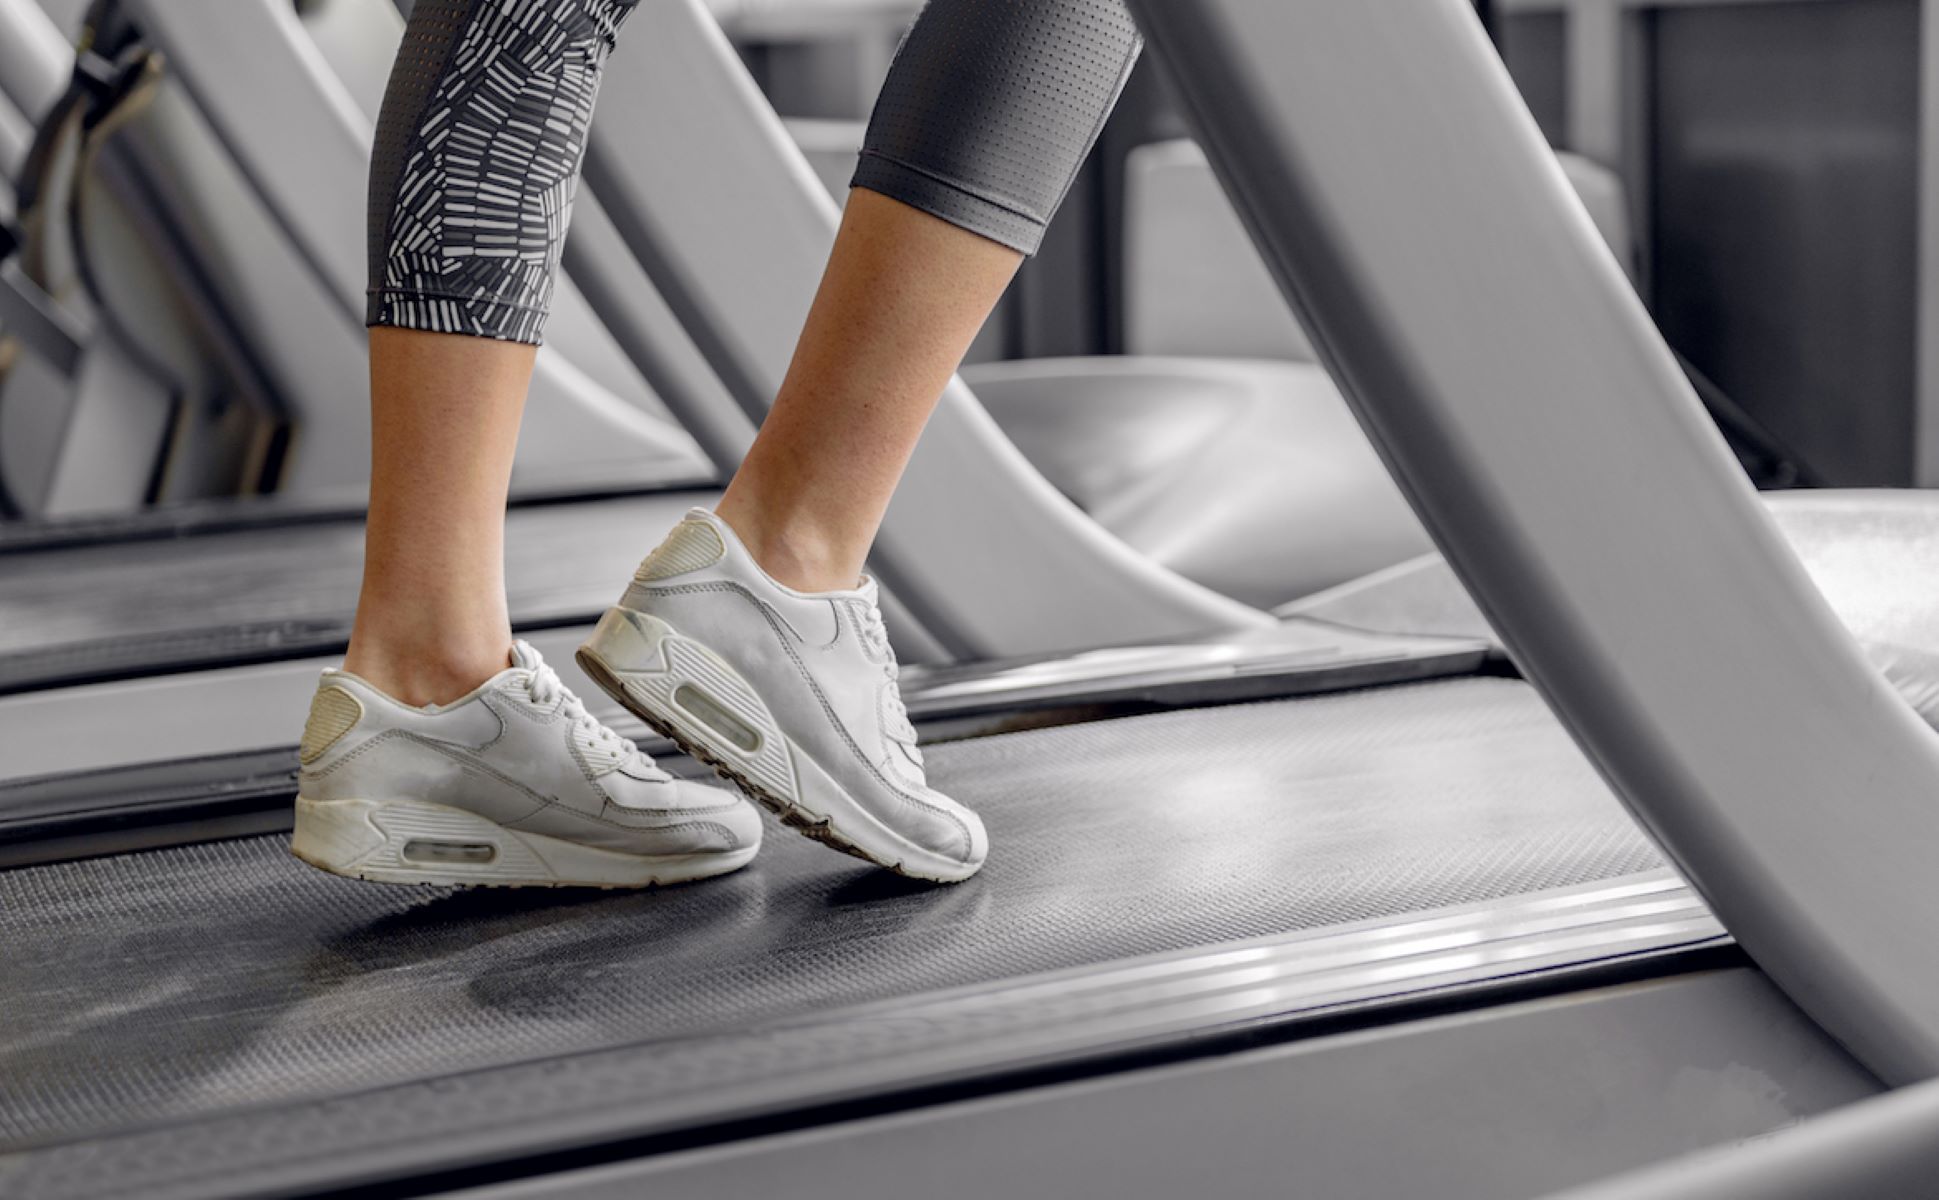 What Is The 12-3-30 Treadmill Workout?